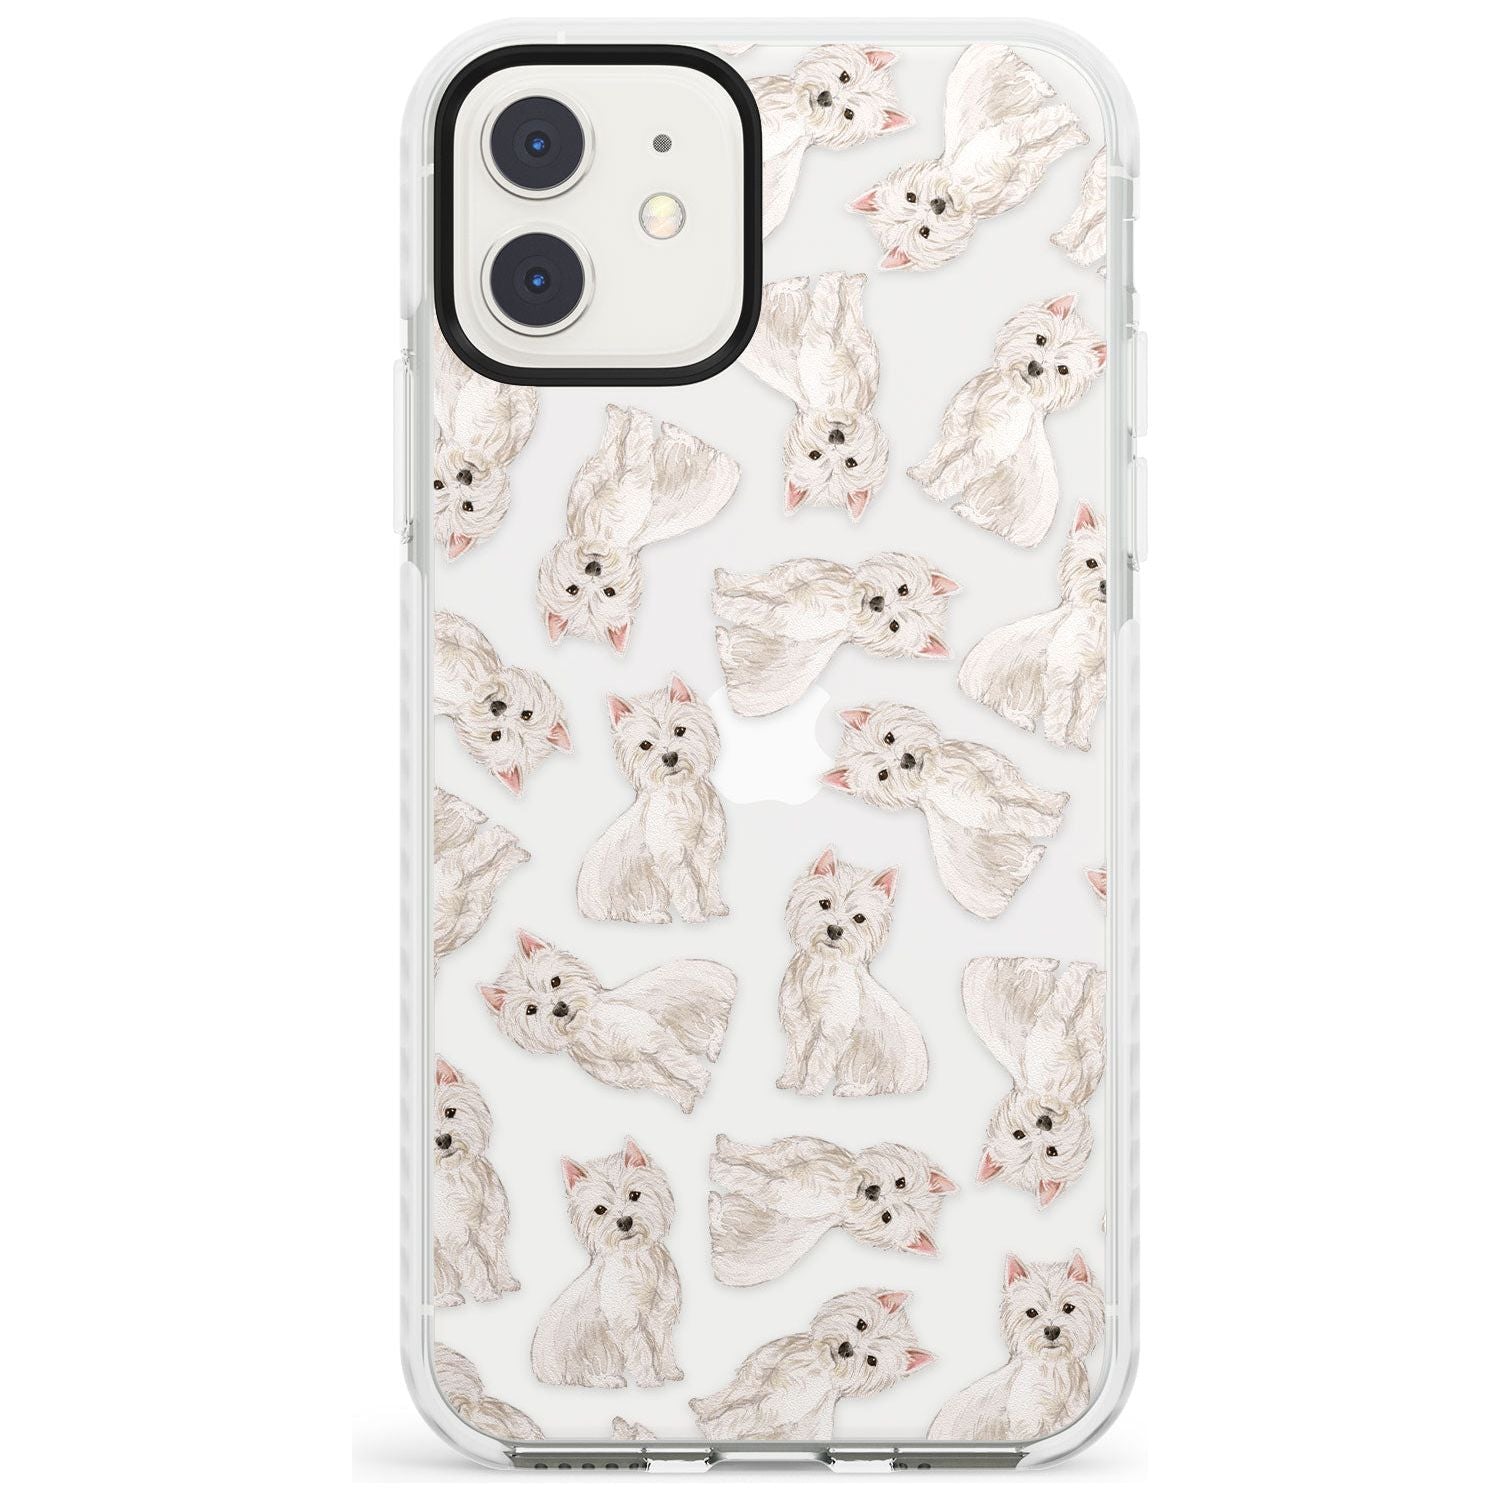 Westie Watercolour Dog Pattern Impact Phone Case for iPhone 11